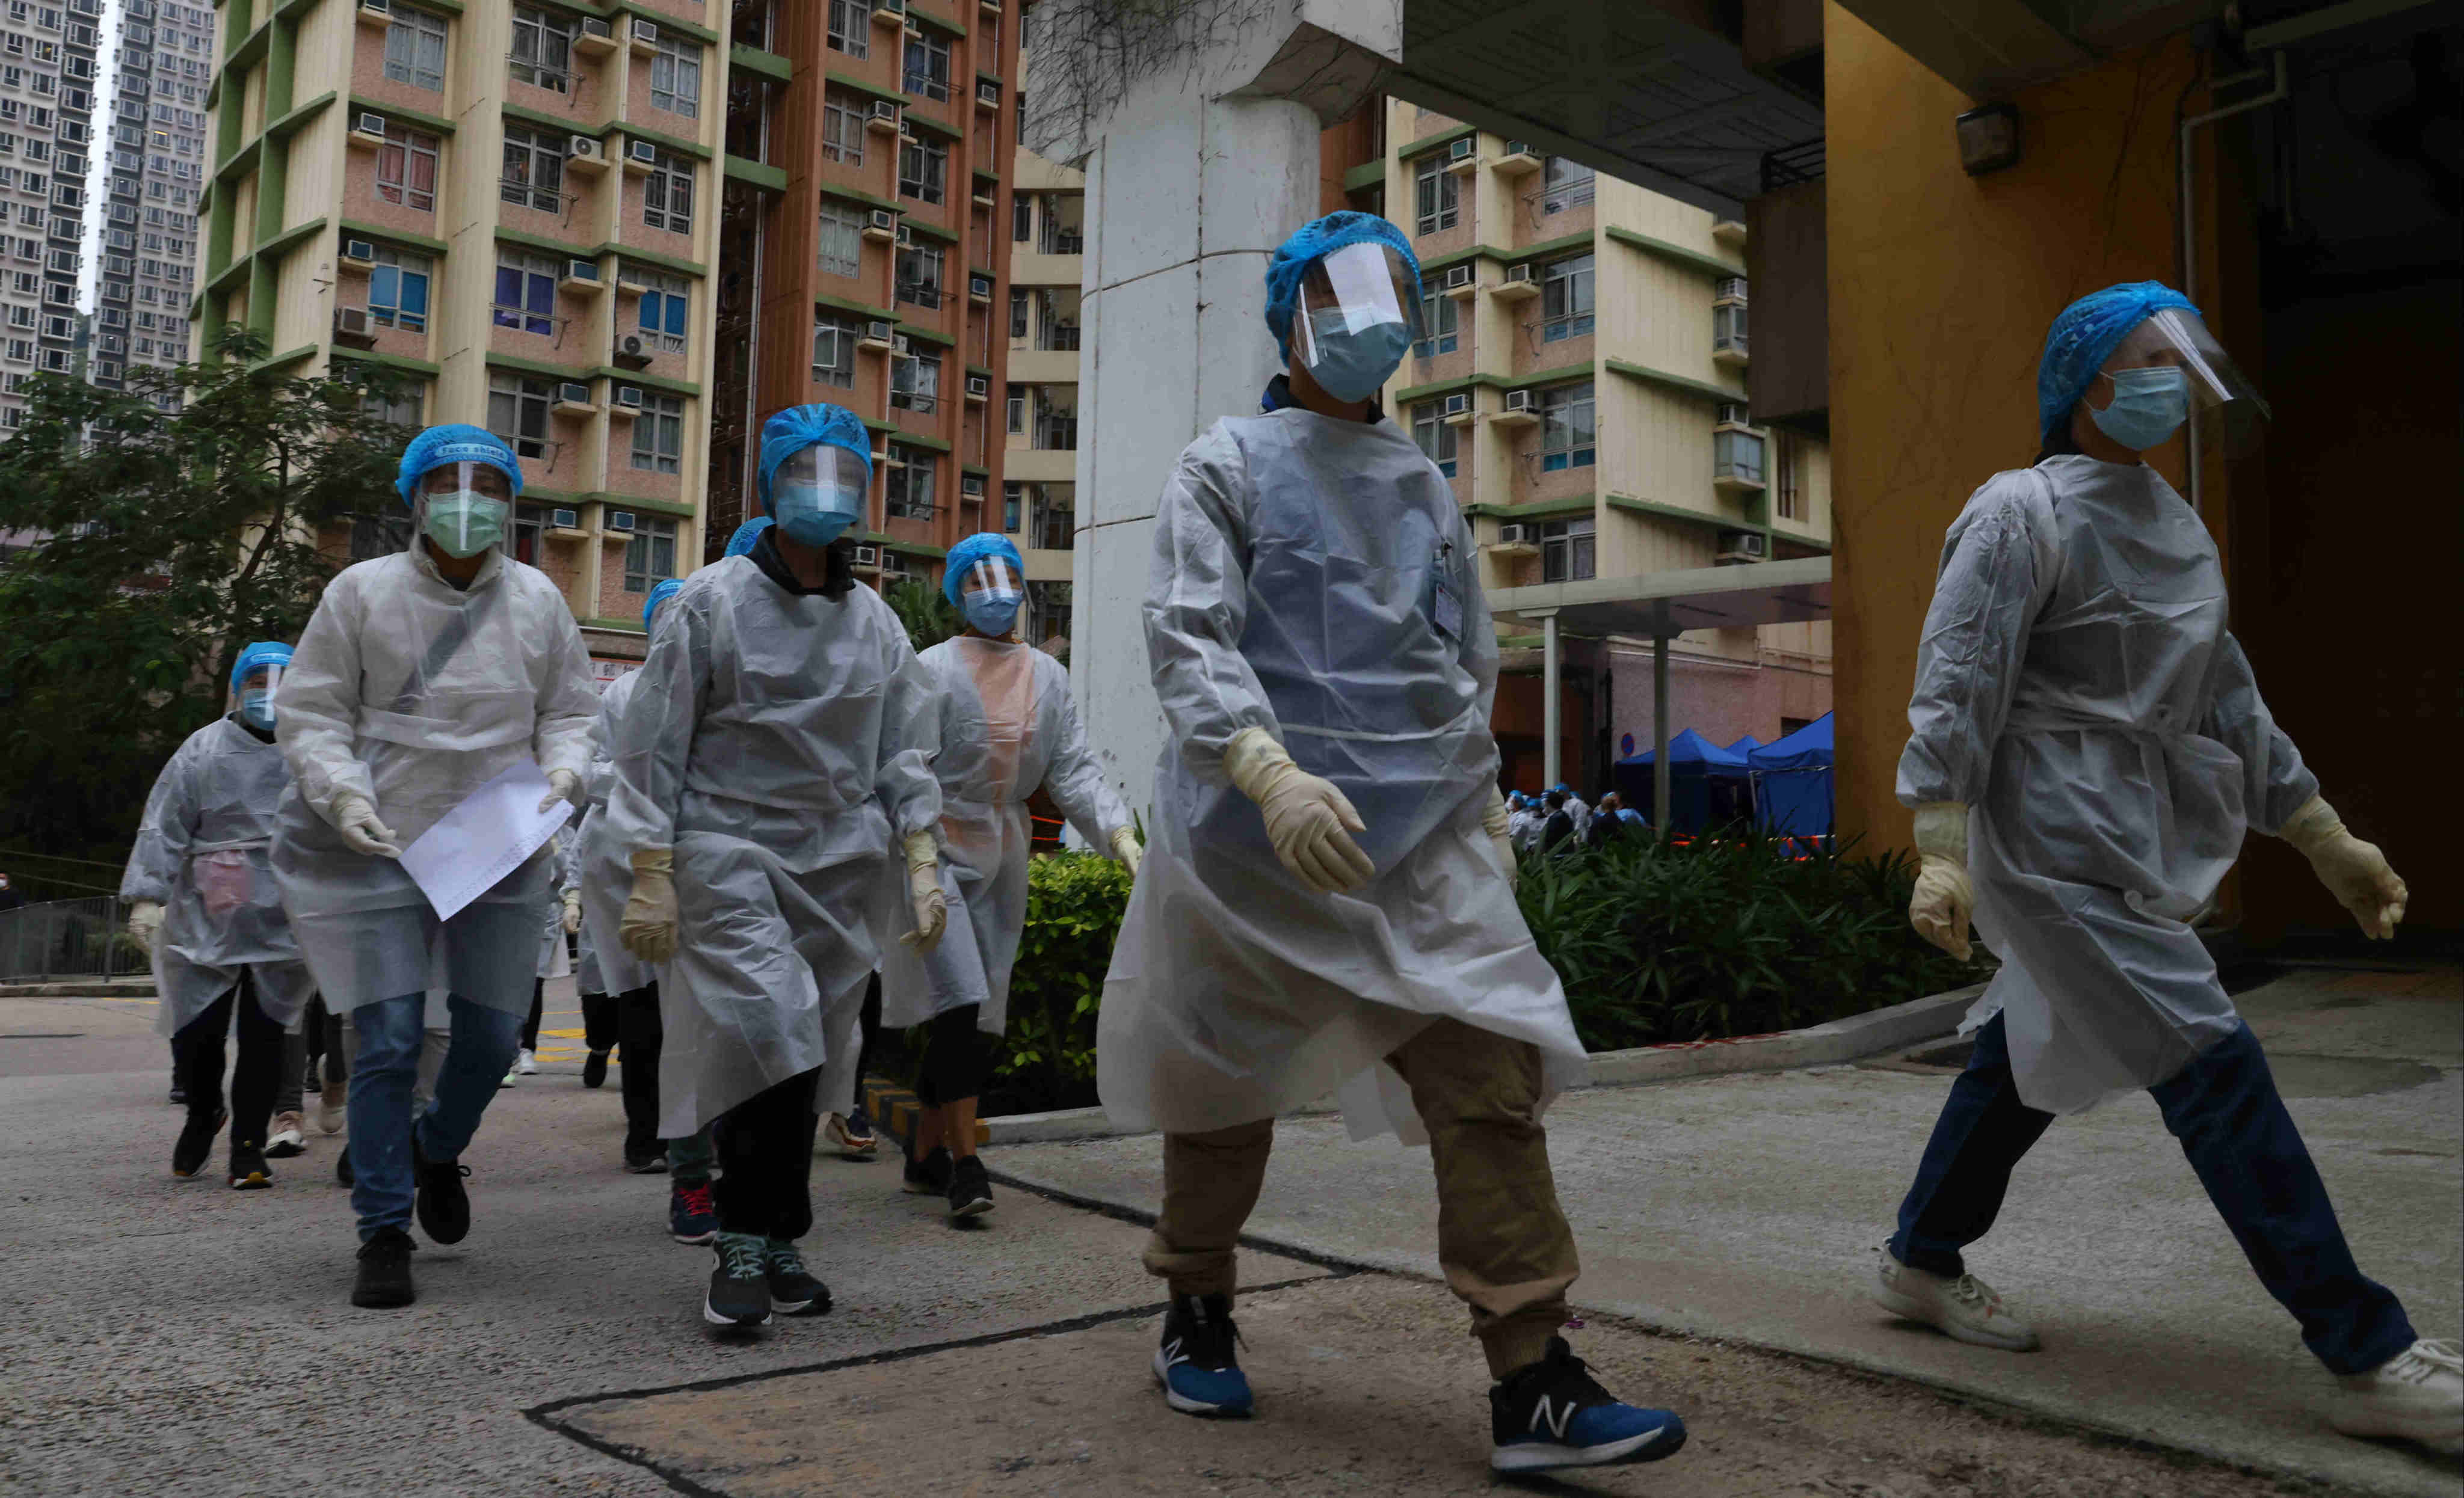 Health workers descend on Mei Tin Estate in Tai Wai on Monday where suspected cases were identified during a lockdown. Photo: Dickson Lee